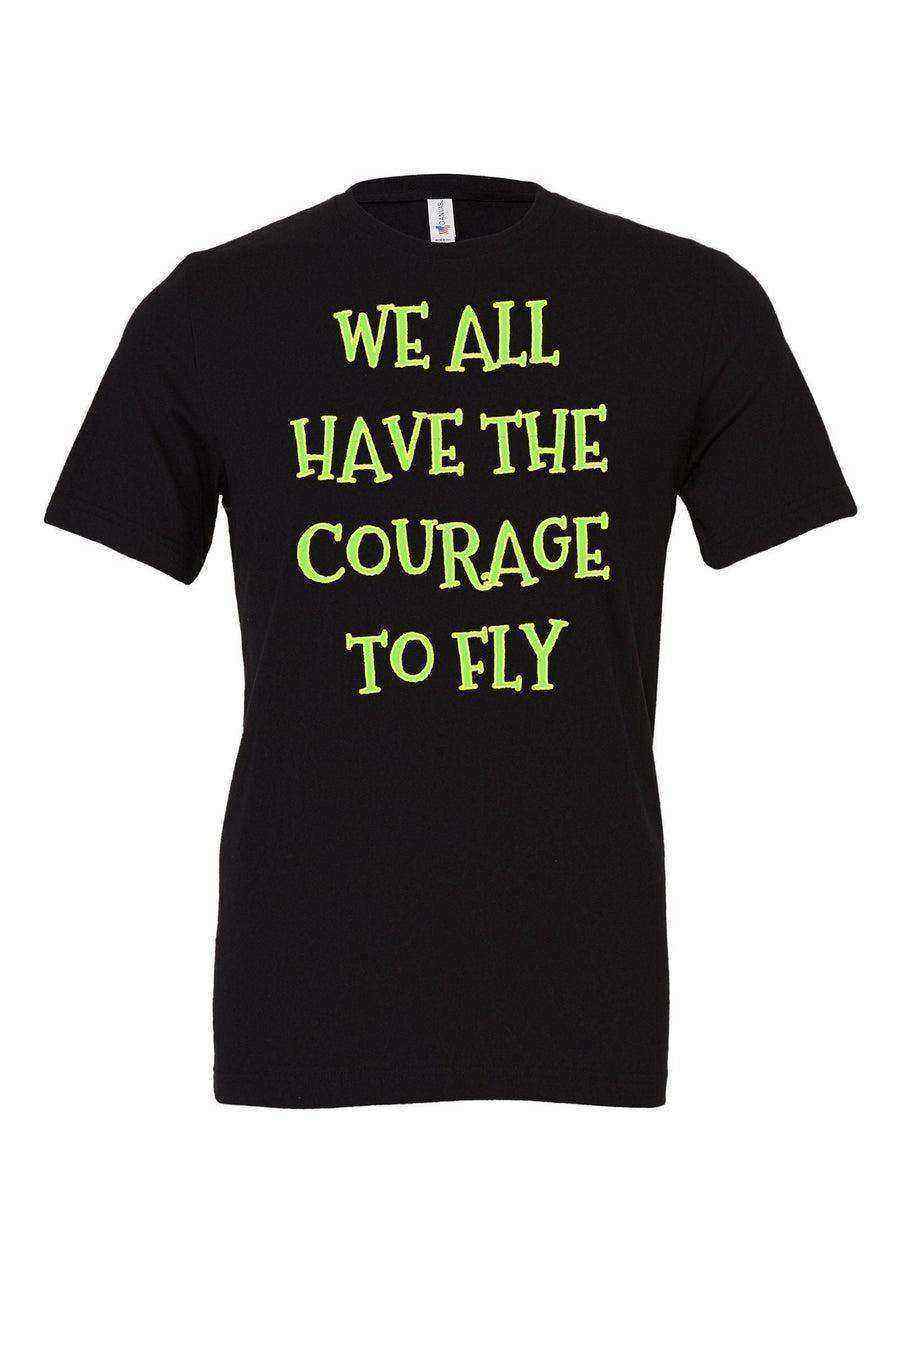 We All Have The Courage To Fly Shirt | Happily Ever After Shirt - Dylan's Tees